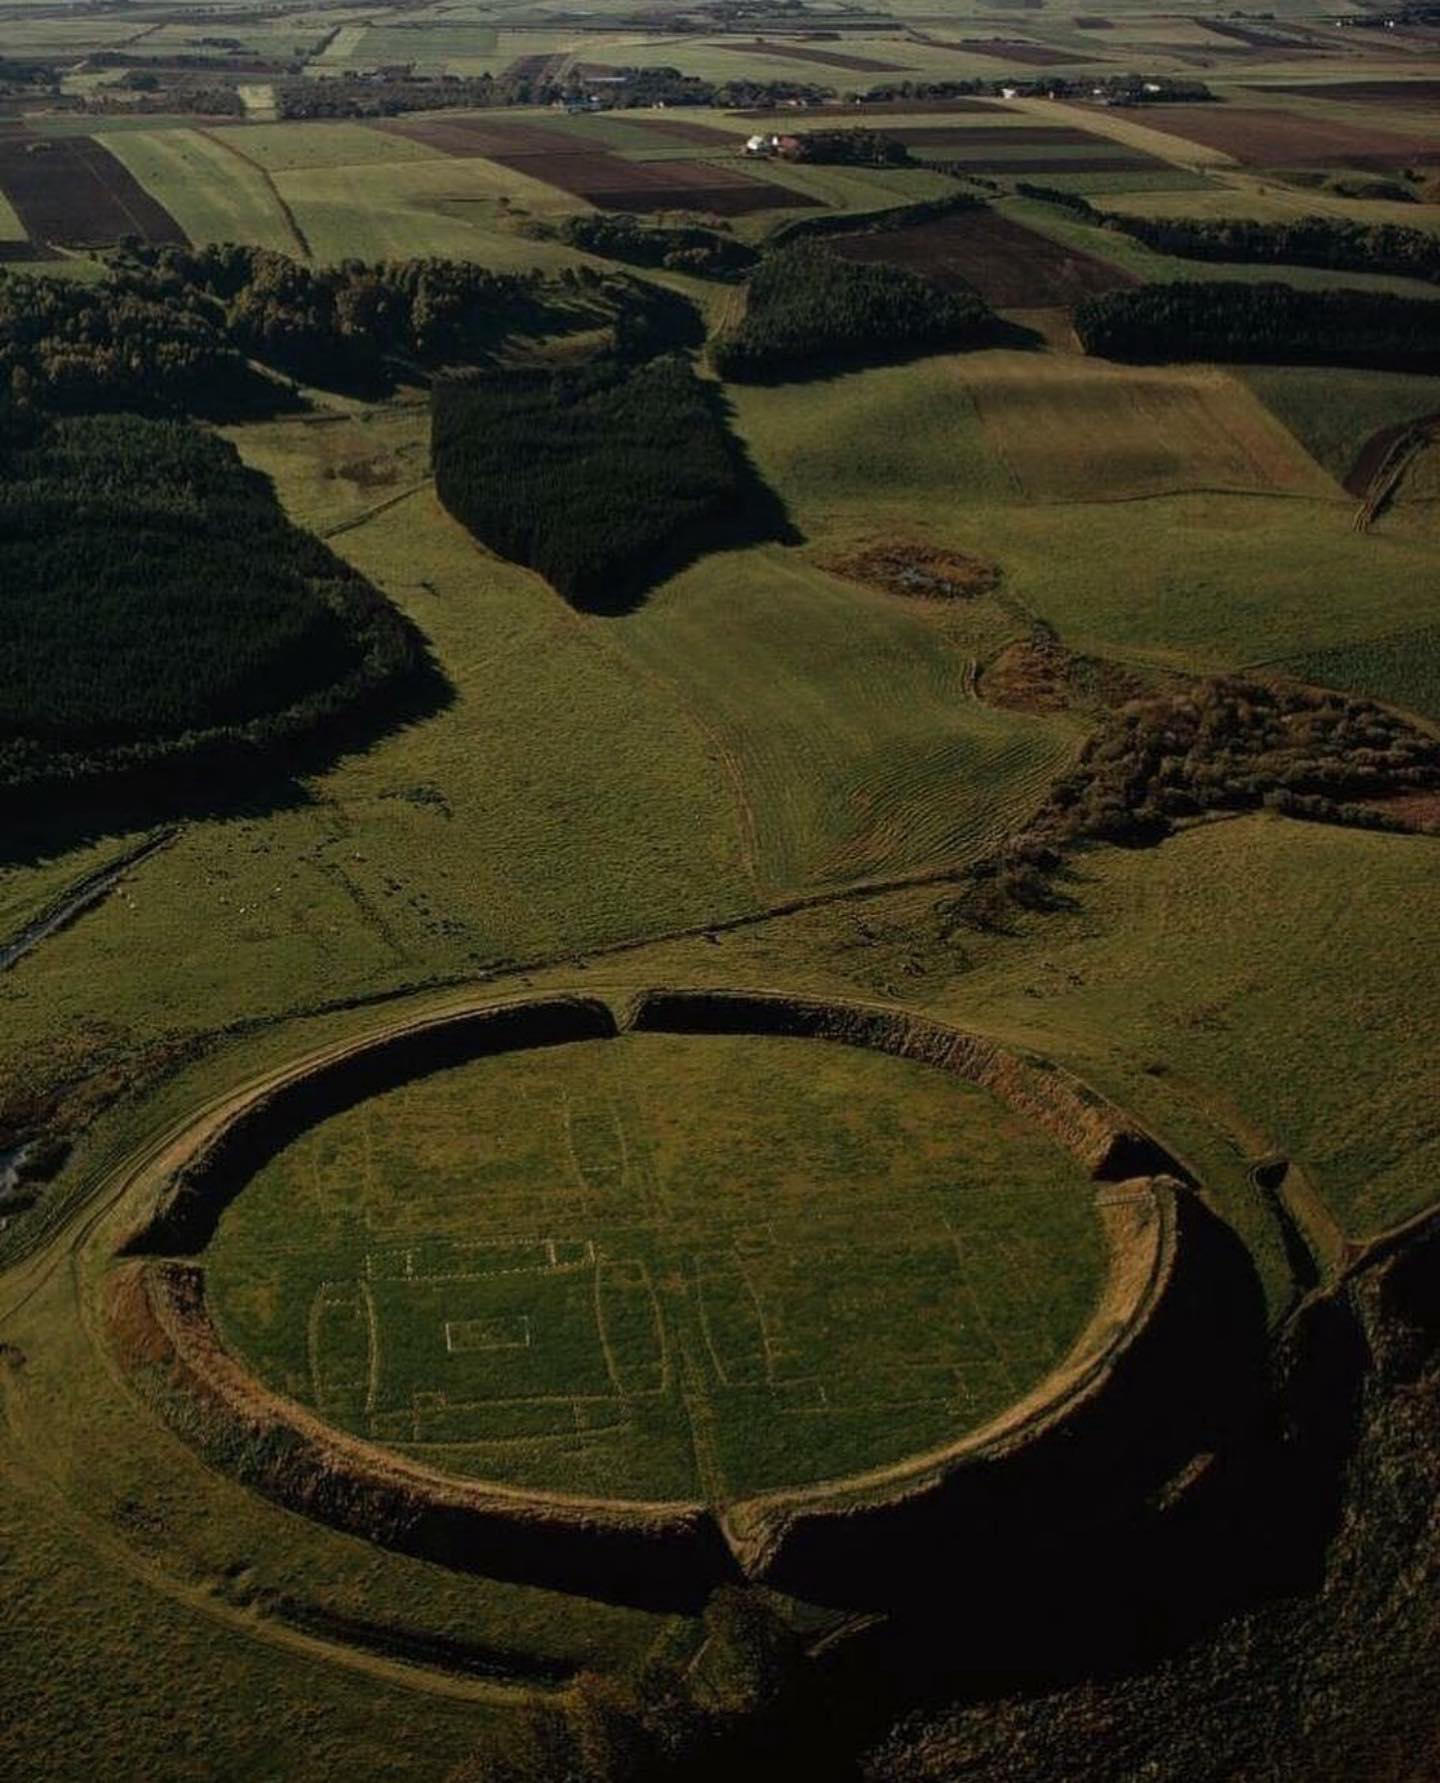 image  1 Somewhere I Would Like To Live - #Viking #ring #castle in #Denmark dating from c 980 AD #somewhereiw